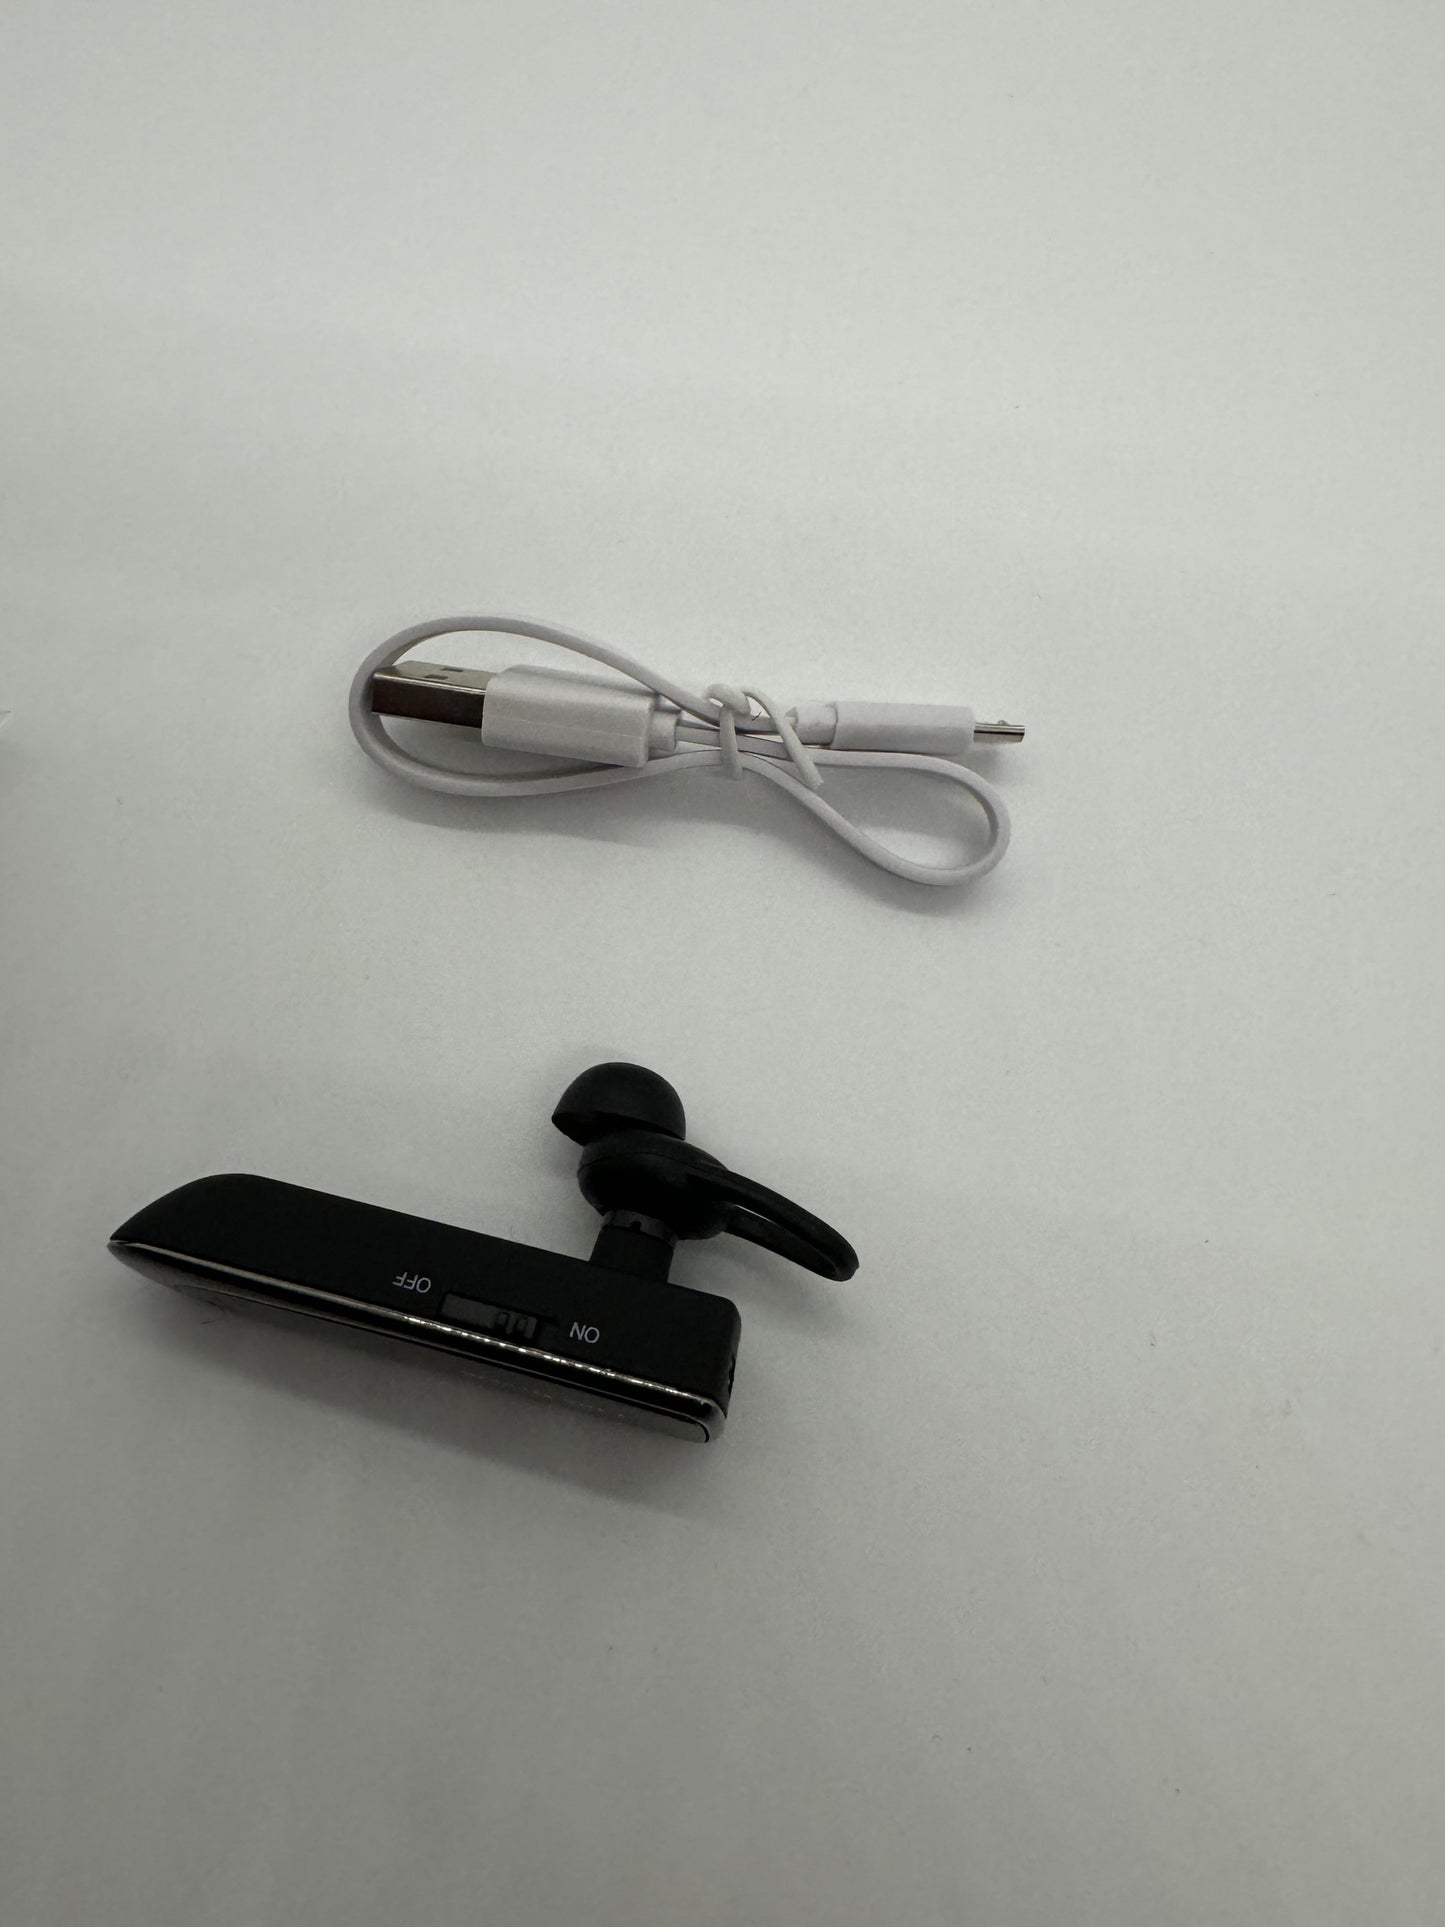 The picture shows two items on a white background. The first item is a white cable, possibly a charging cable. It is coiled up and has a USB connector on one end and a smaller connector, possibly micro USB, on the other end.The second item is a black Bluetooth earpiece. It has a clip on one side, an earbud, and a small rectangular body. On the body, there are words that appear to be "ON" and "OFF" indicating the switch positions, but it is mirrored.